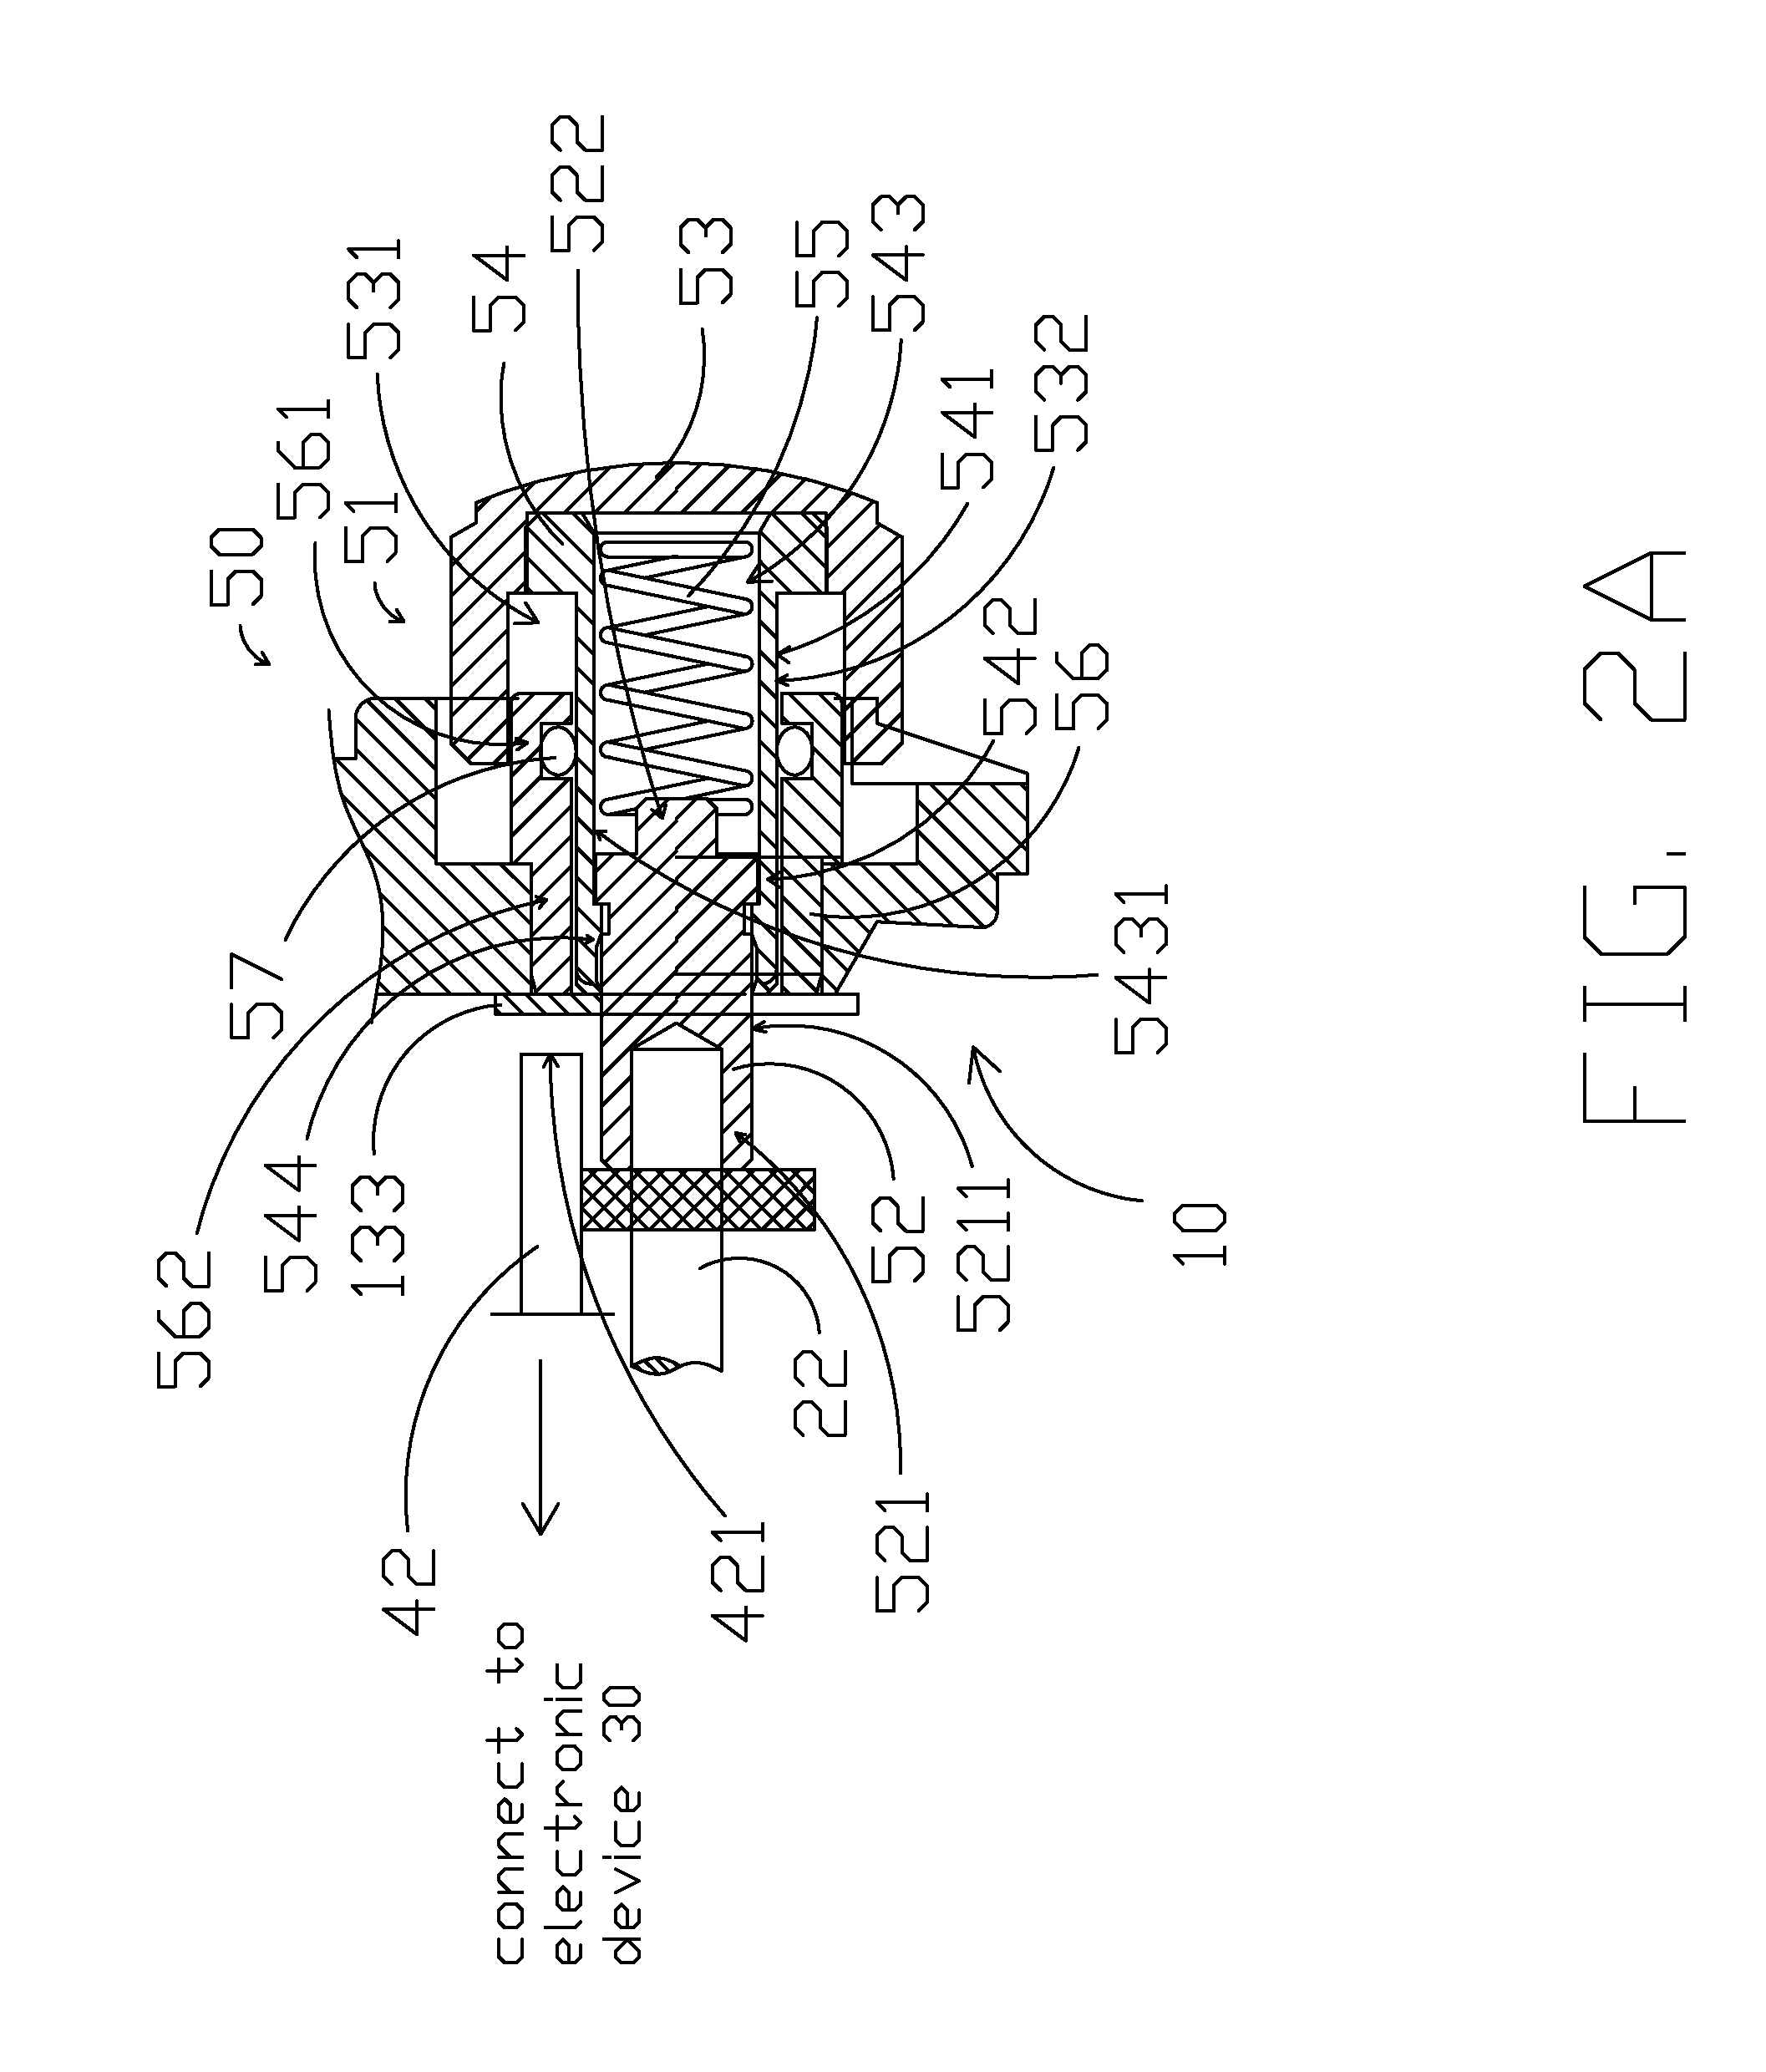 Timepiece with multi-functional actuator